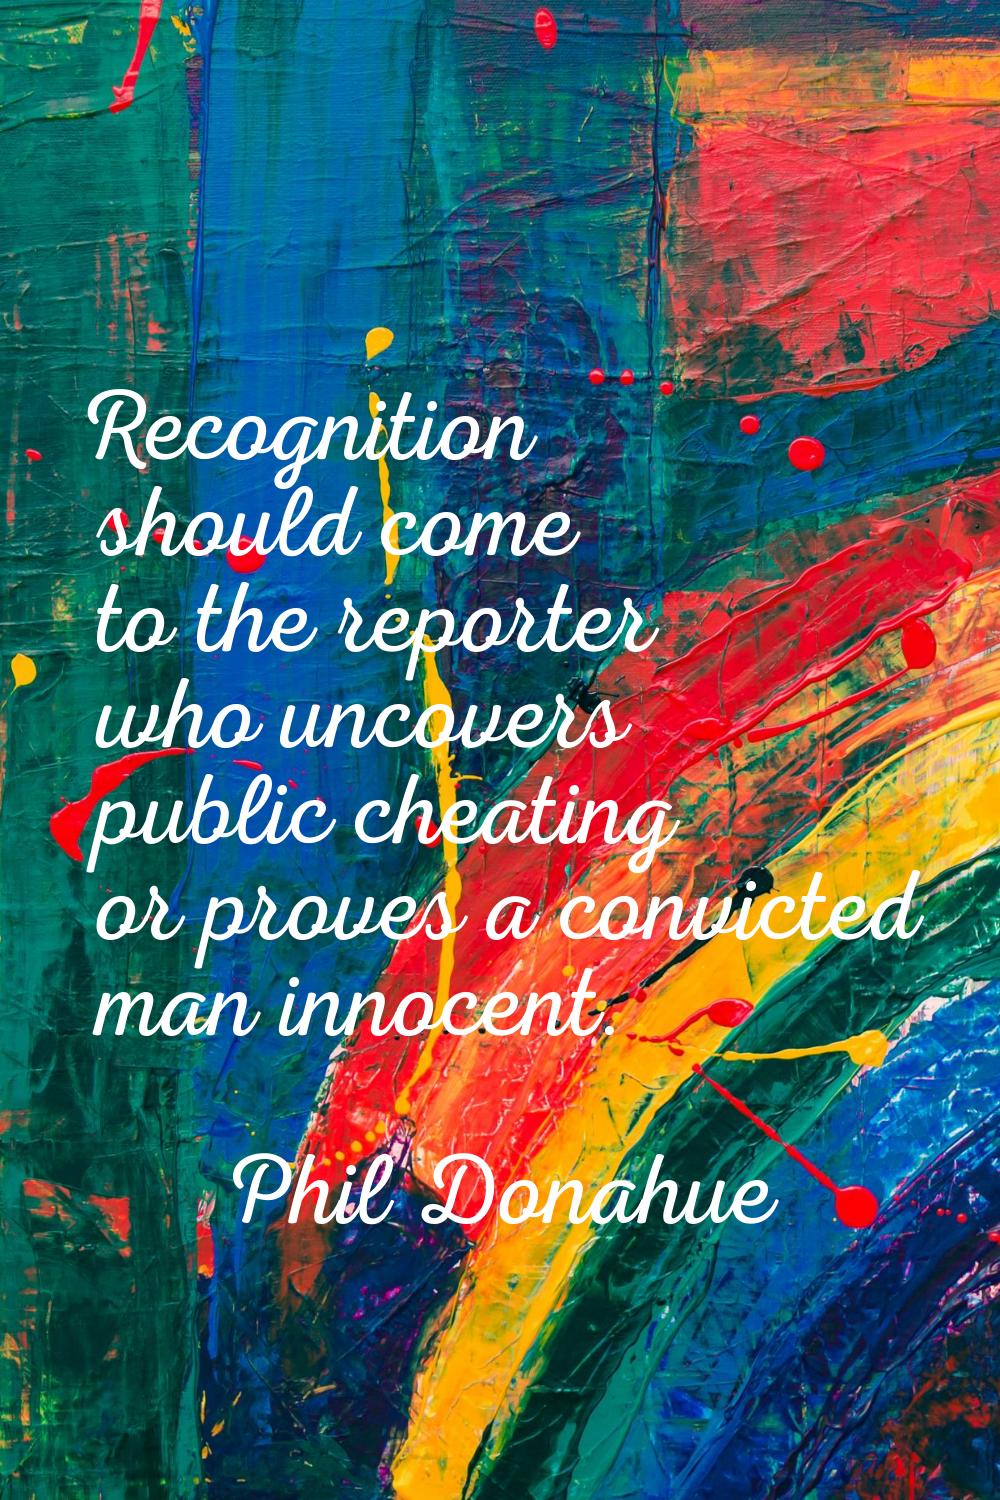 Recognition should come to the reporter who uncovers public cheating or proves a convicted man inno